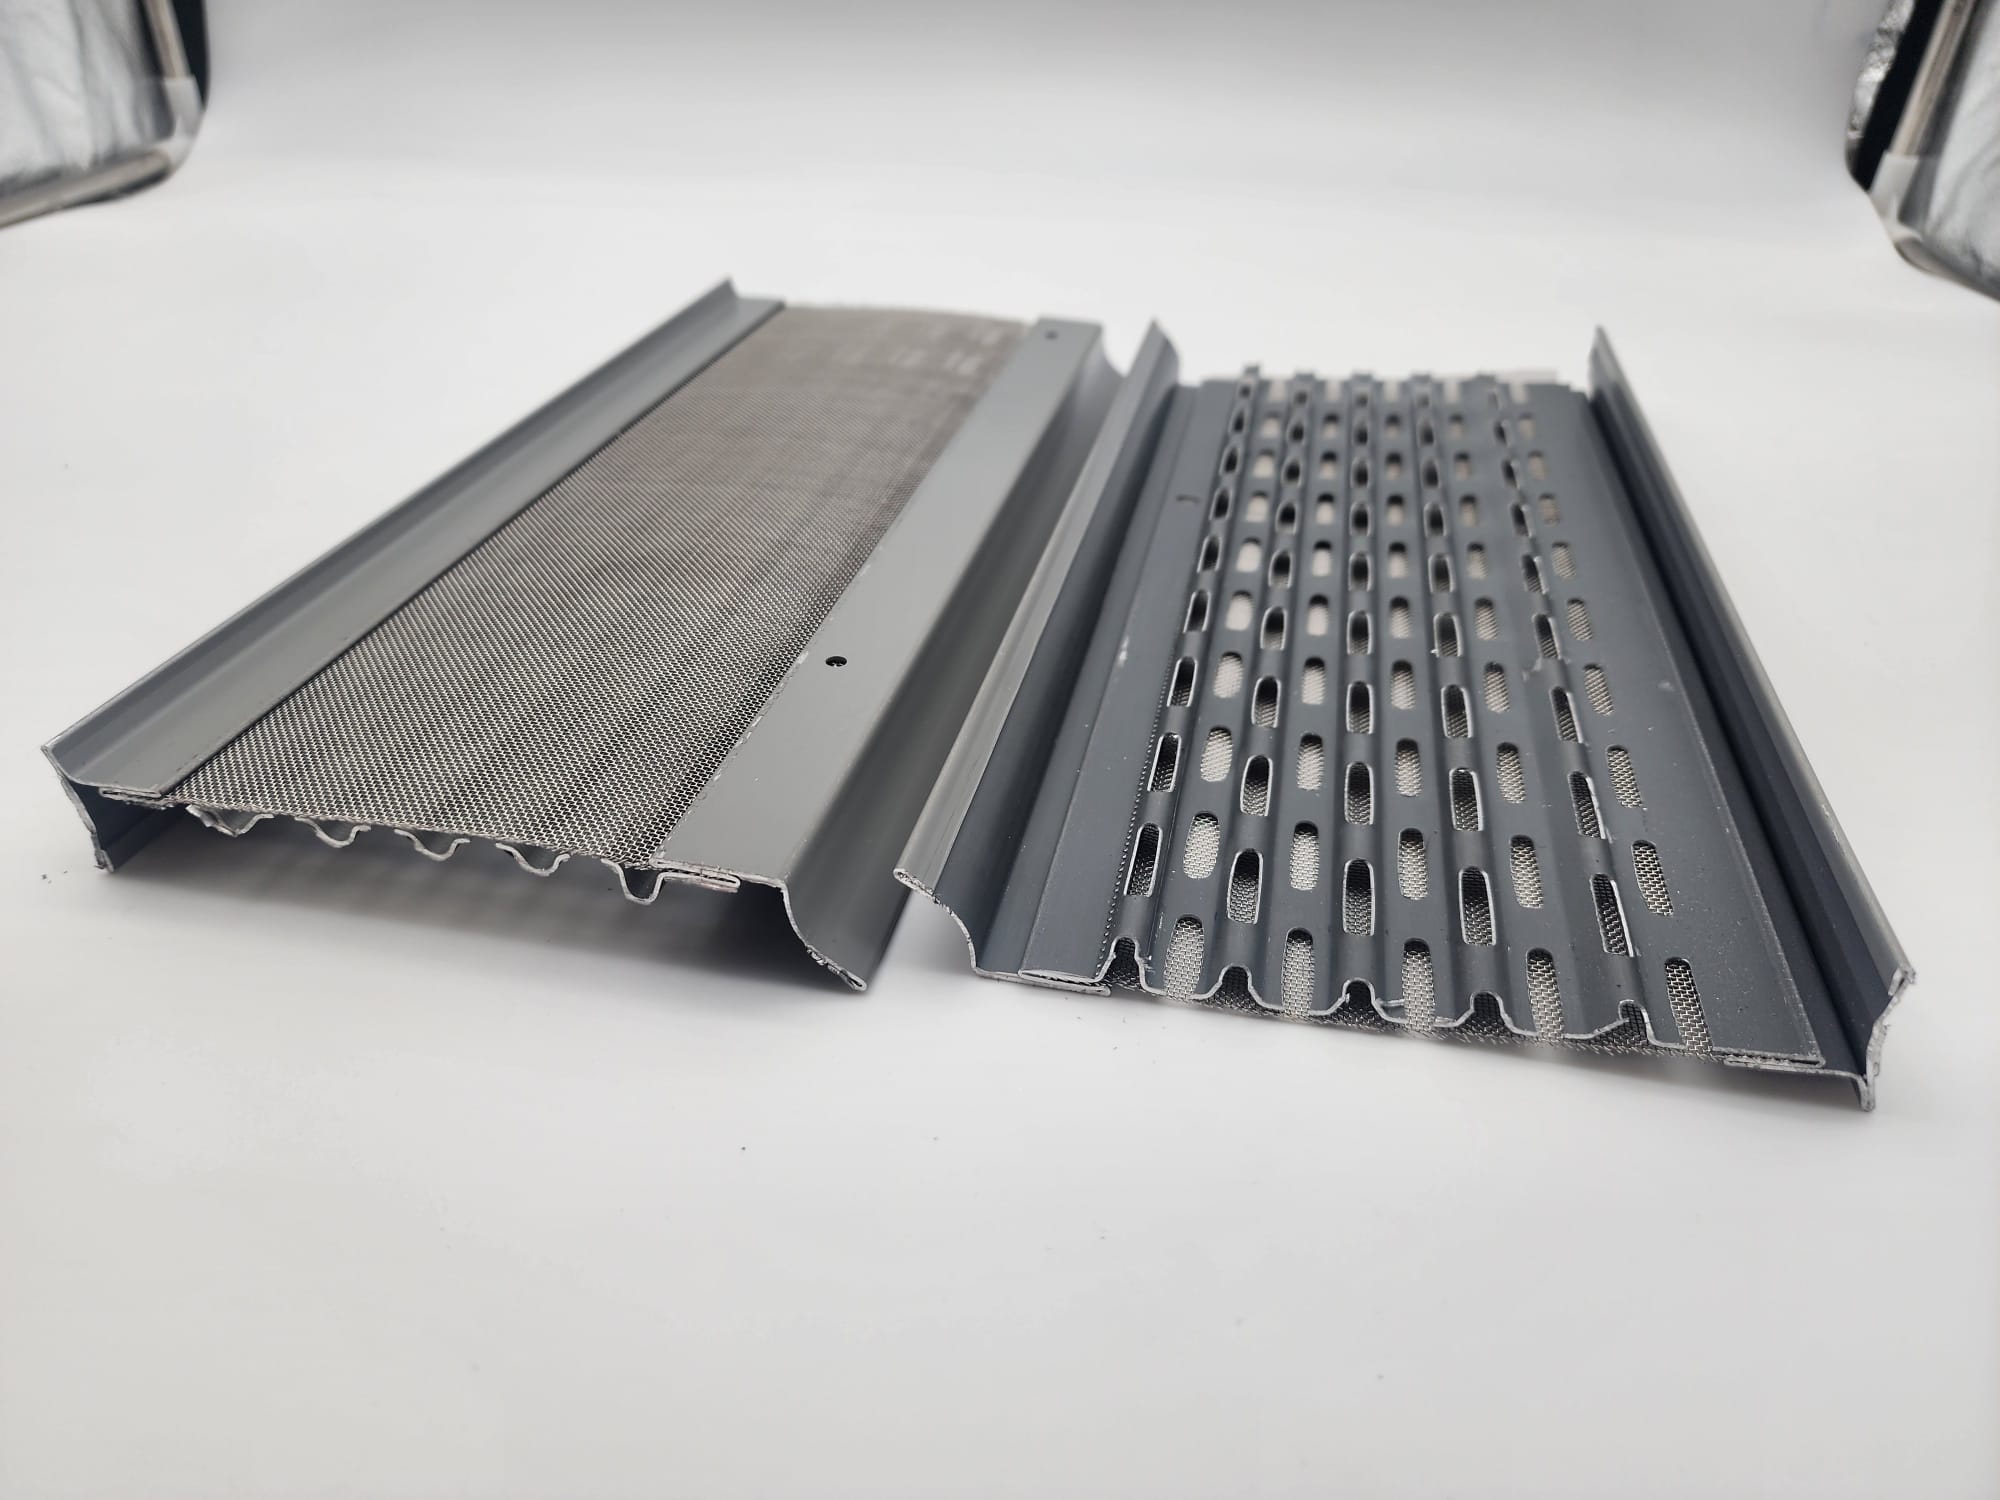 ELITE-5" Leaf Guards for Gutters with Stainless Steel Micromesh Gutter Guard Leaf Filter – Contractor Grade Aluminium Gutter Covers from Manufacturer&nbsp;